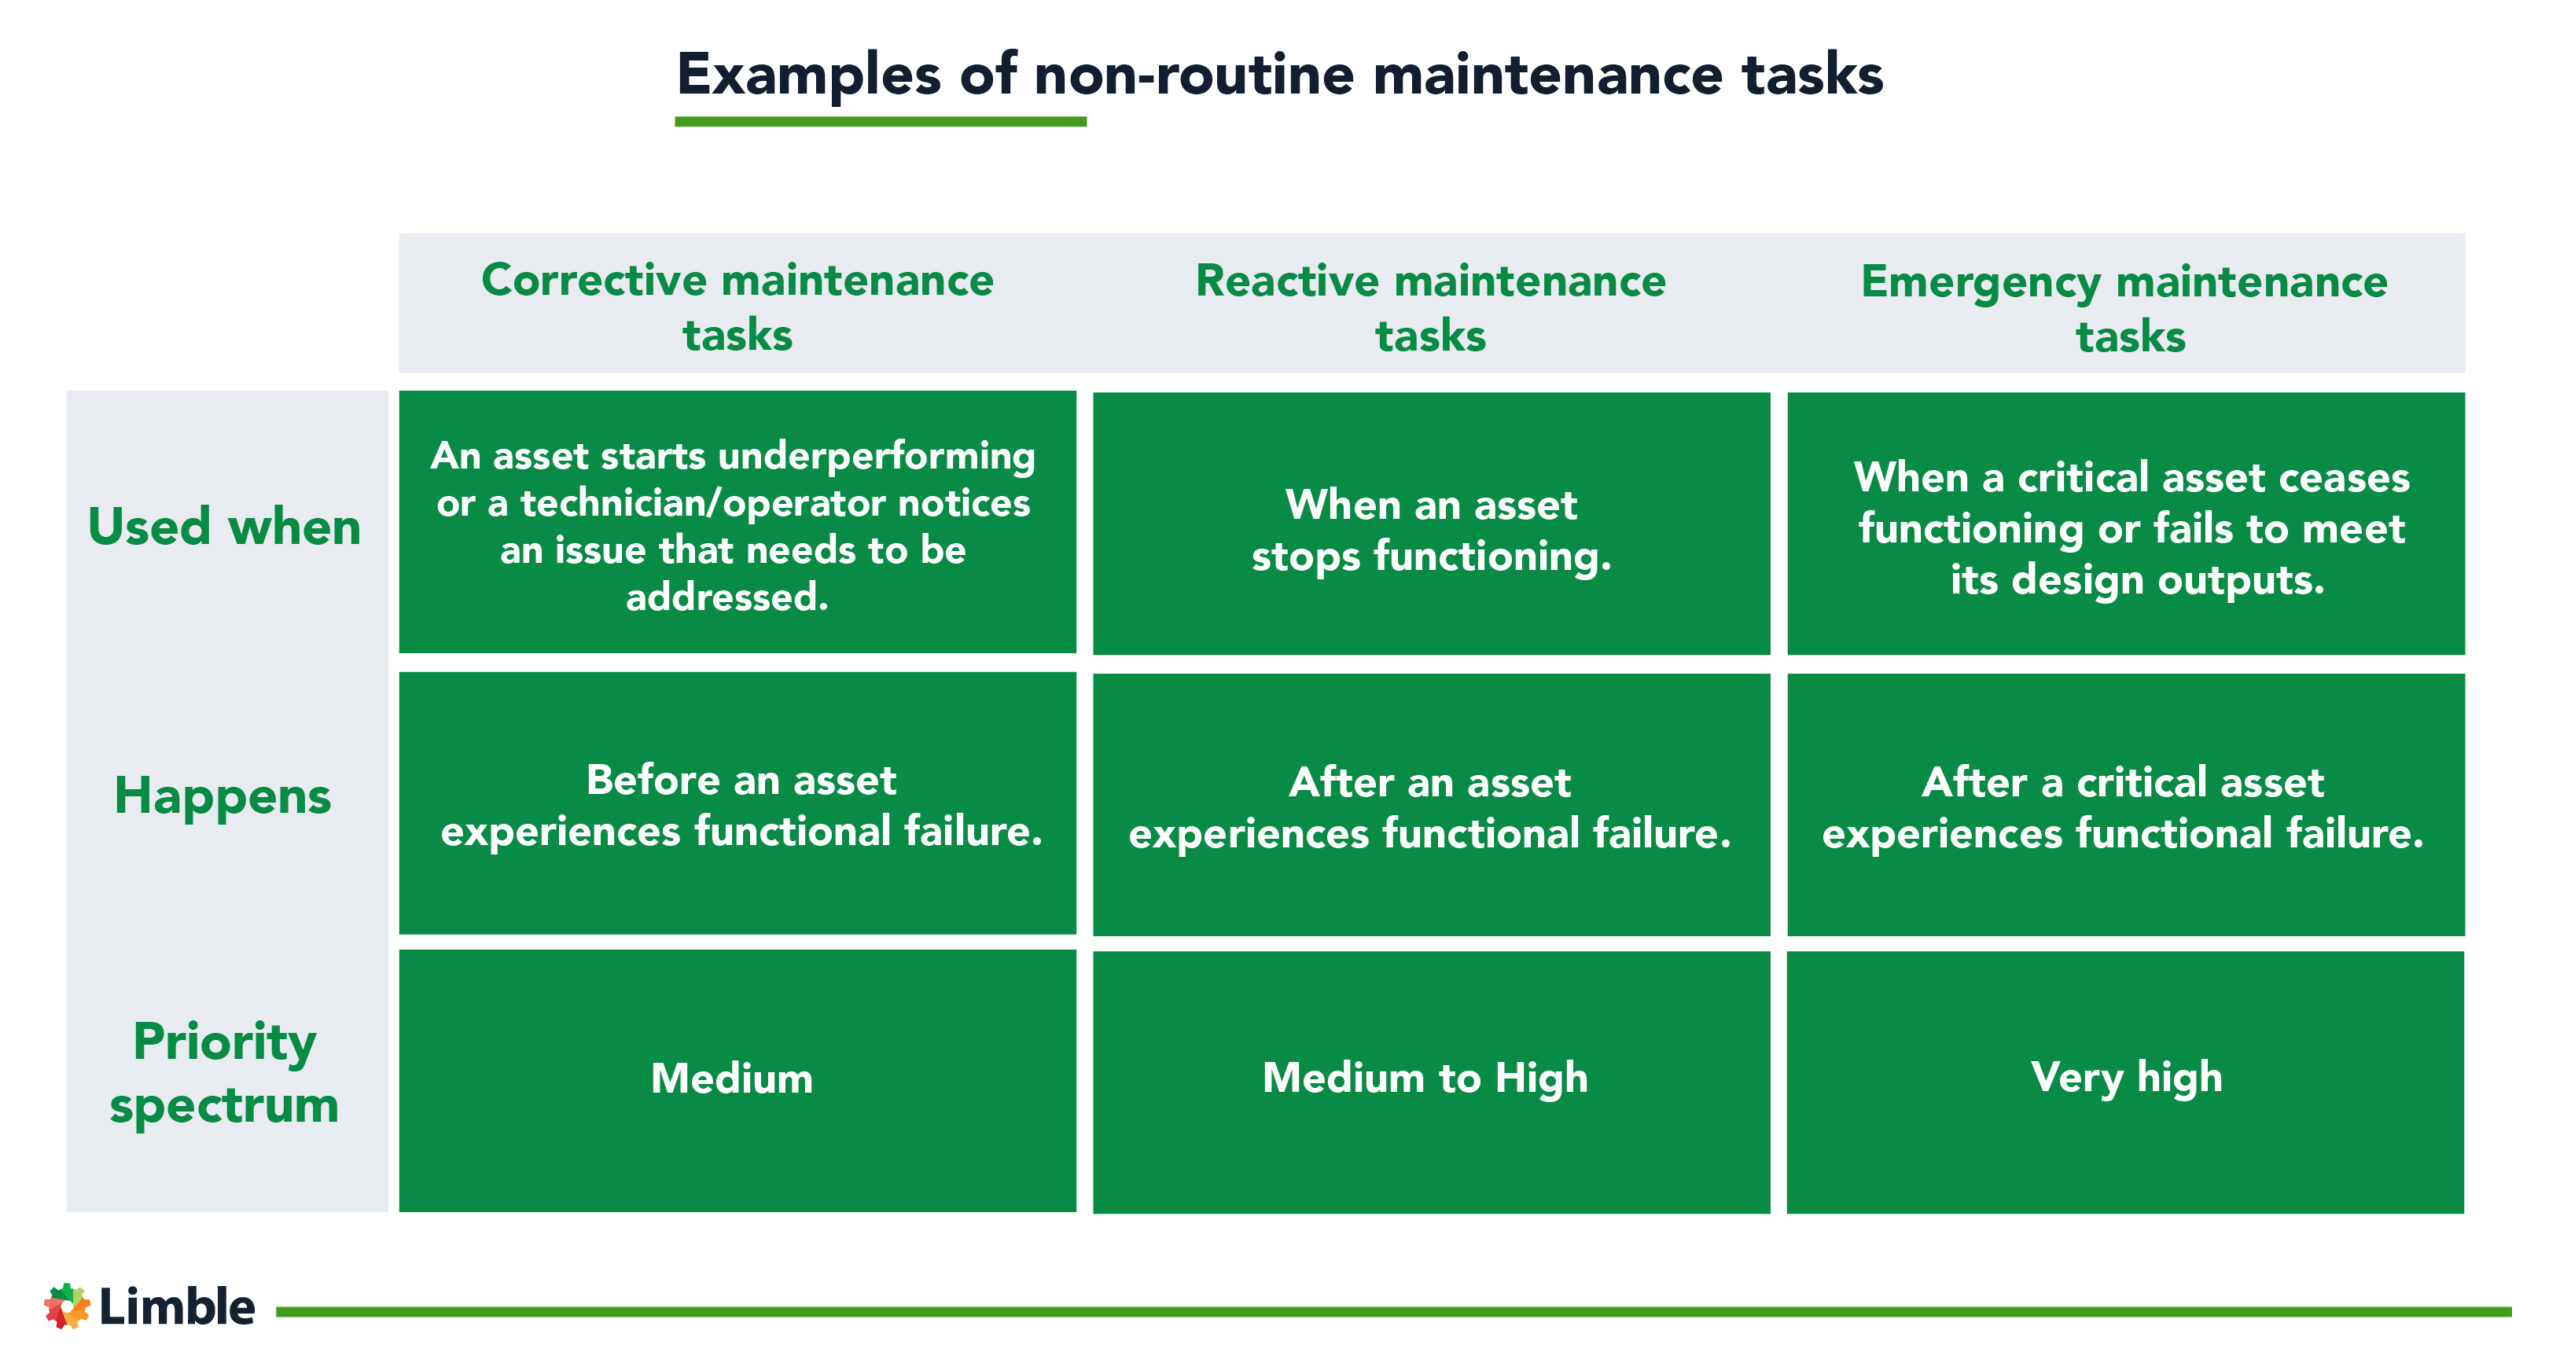 examples of non-routine maintenance